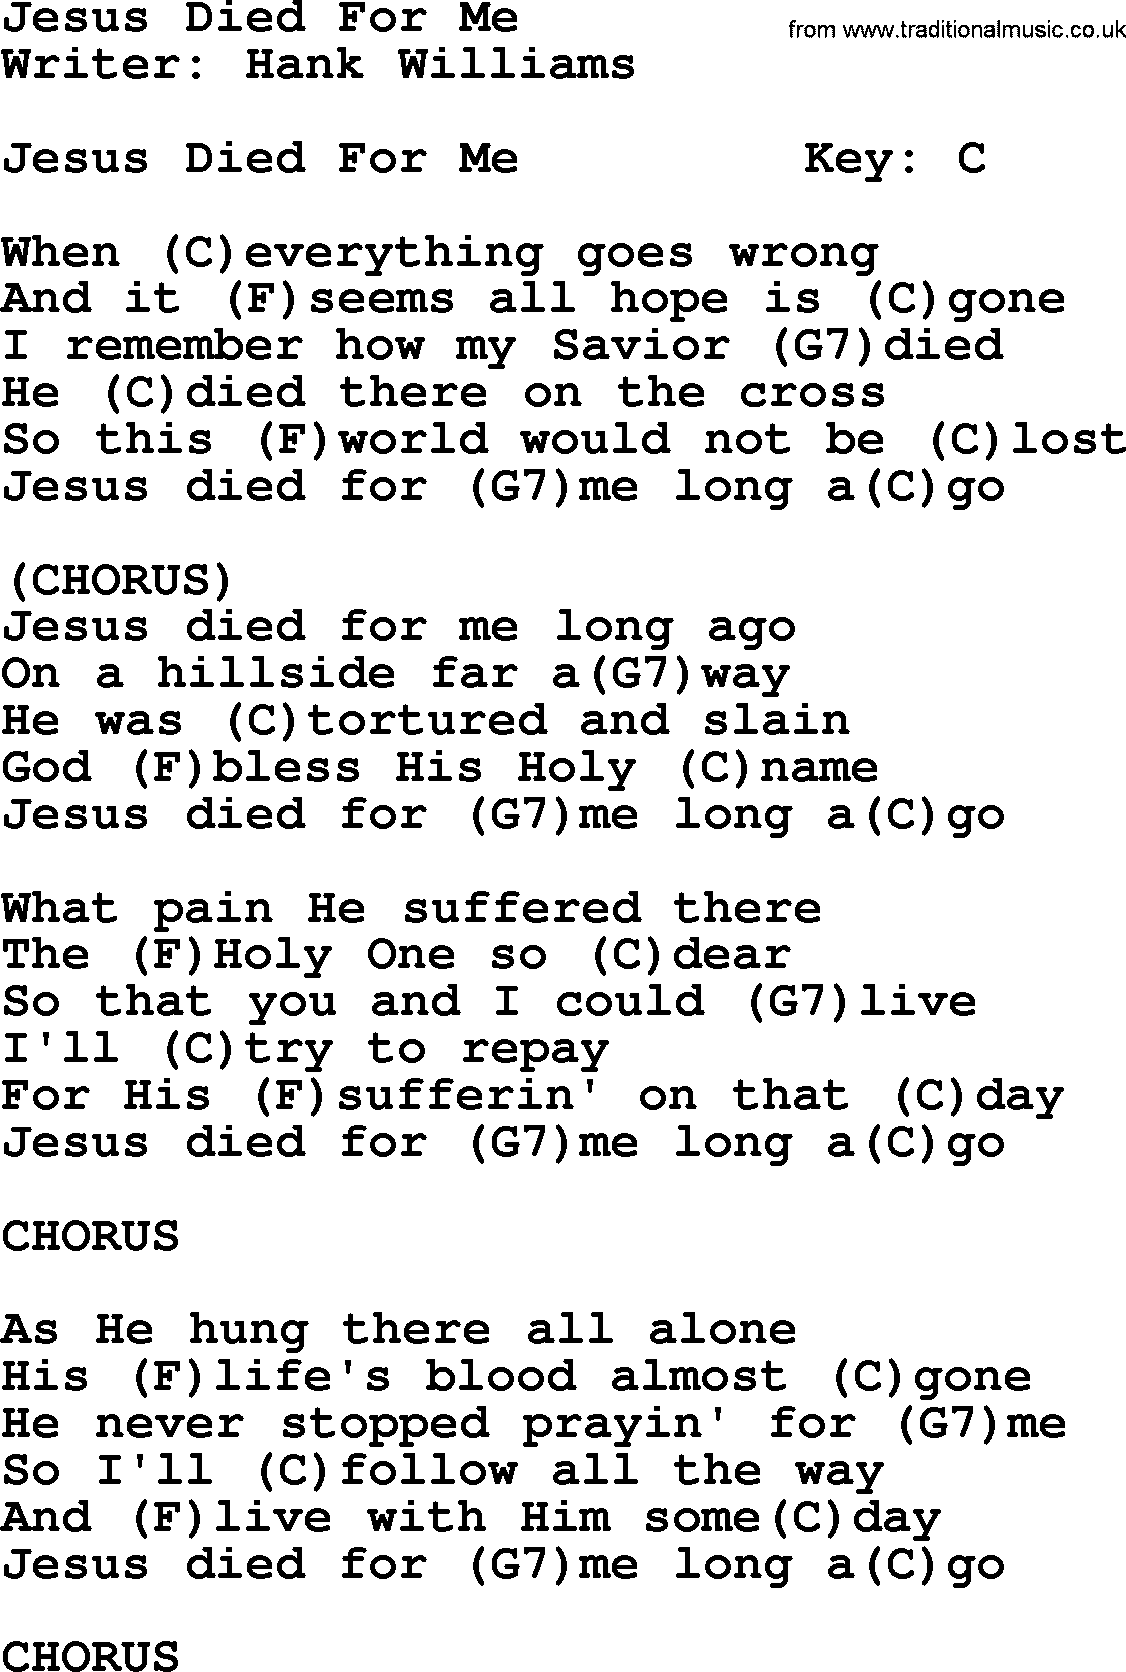 Hank Williams song Jesus Died For Me, lyrics and chords